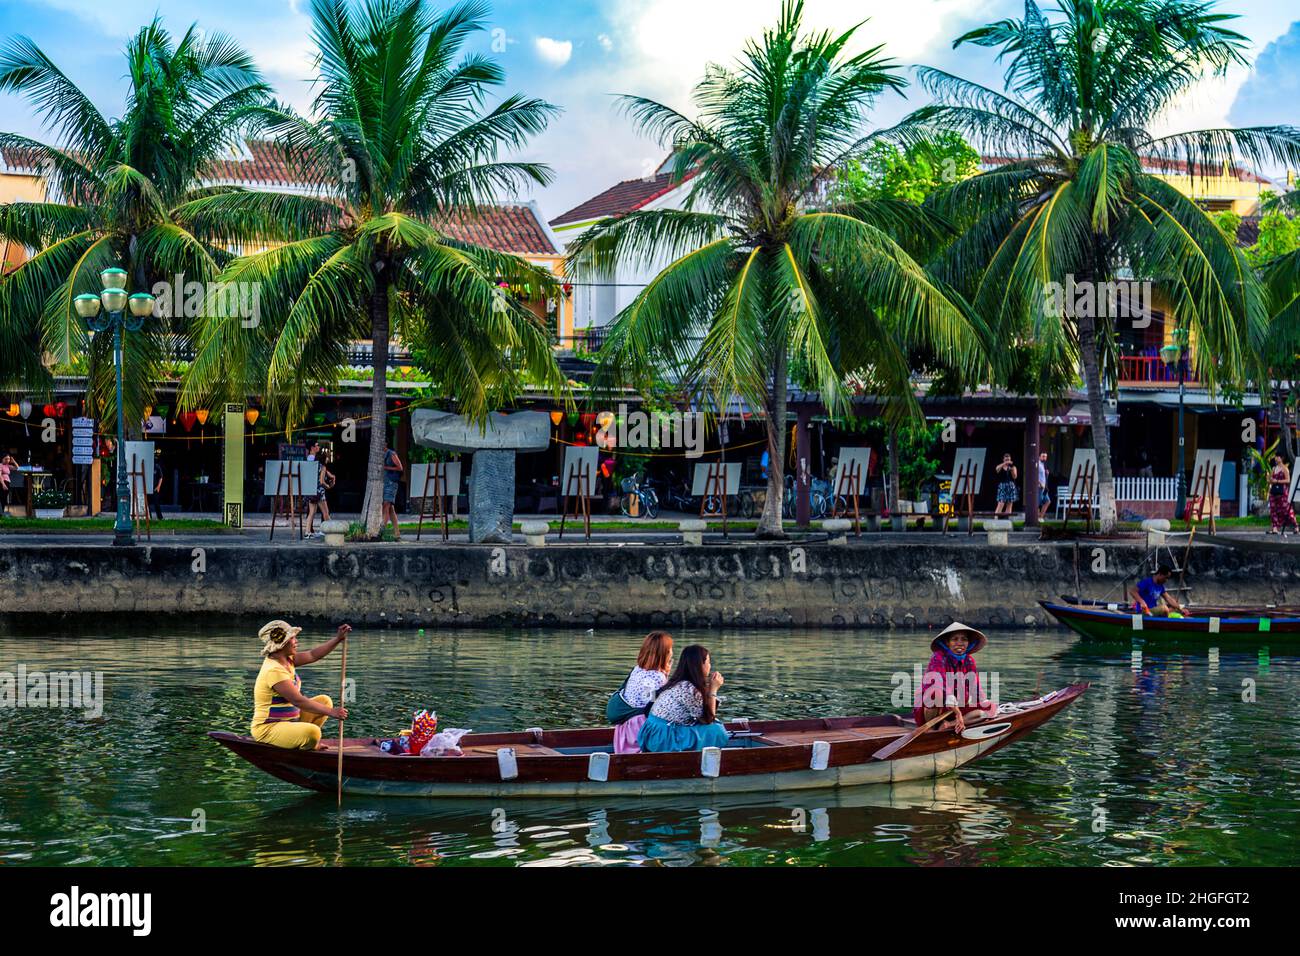 A small wooden tour boat goes down the Thu bon river carrying tourists by Old Town, Hoi An. Stock Photo